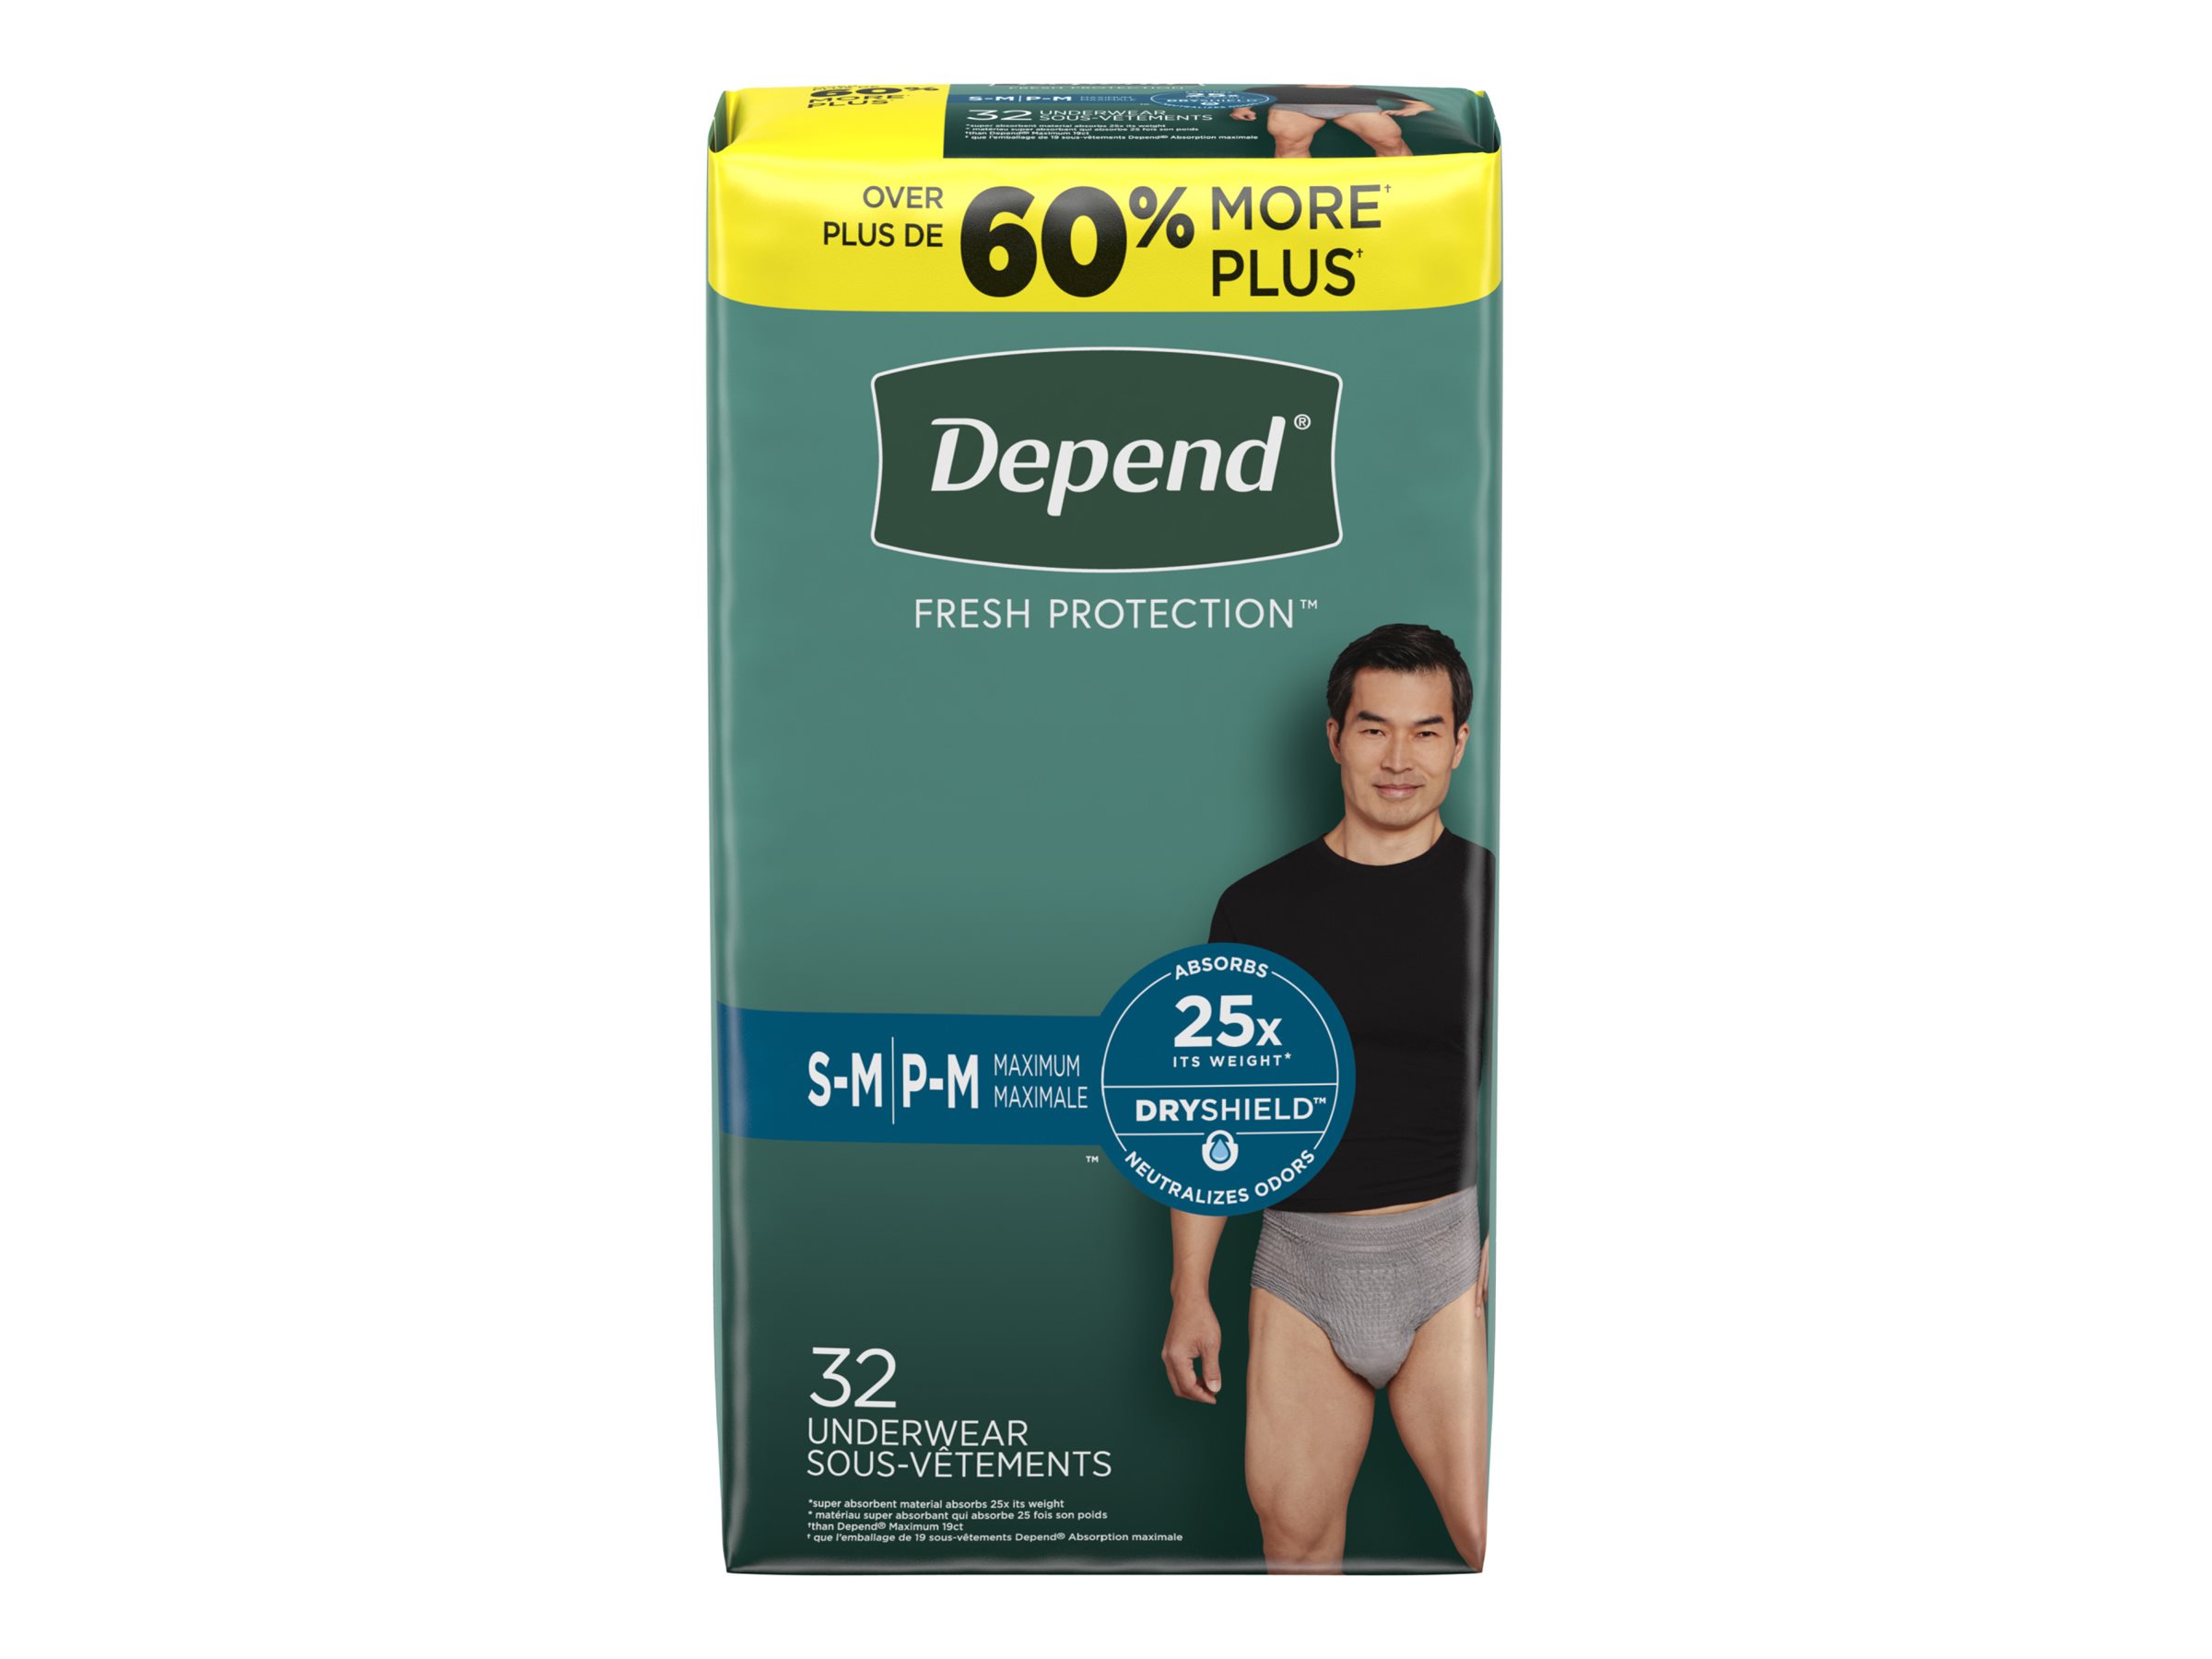 Depend Real Fit Adult Incontinence Underwear for Men, Maximum